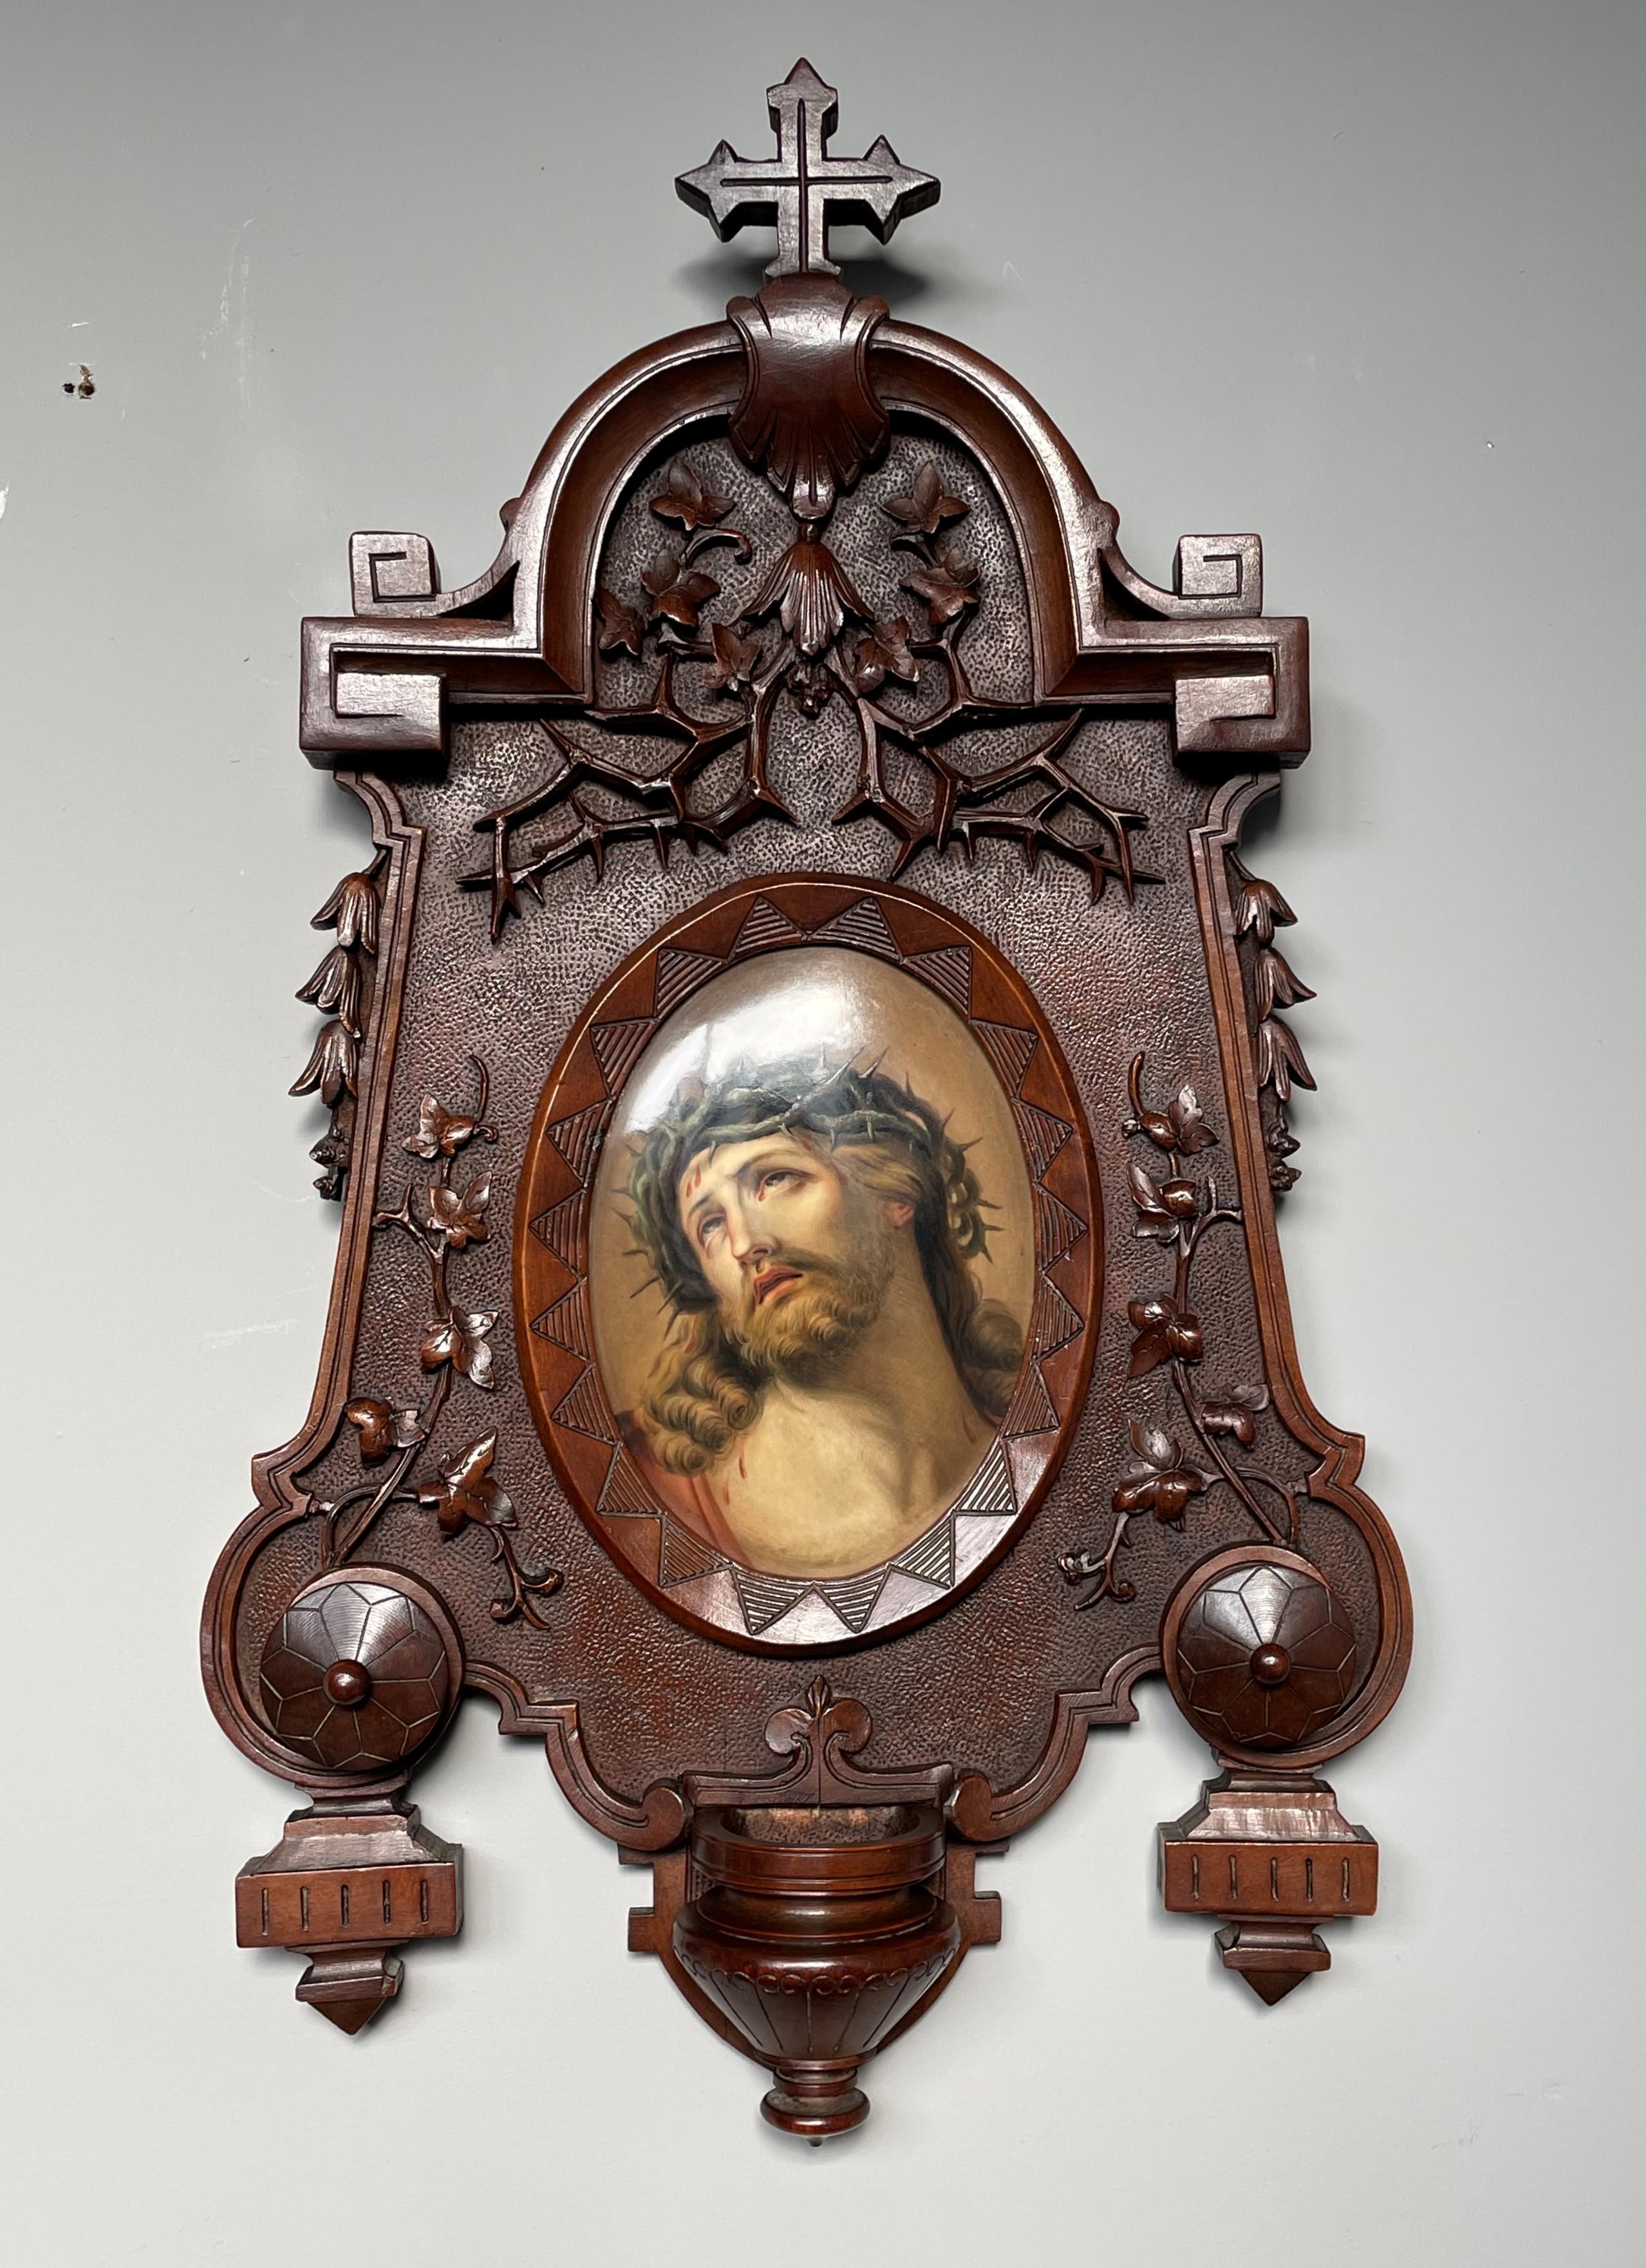 Hand painted image of Christ on a porcelain plaque by Königliche Porzellan-Manufaktur, Germany circa 1900.

The details in this antique work of art and the materials that were used, make this one of the most beautiful and impressive religious